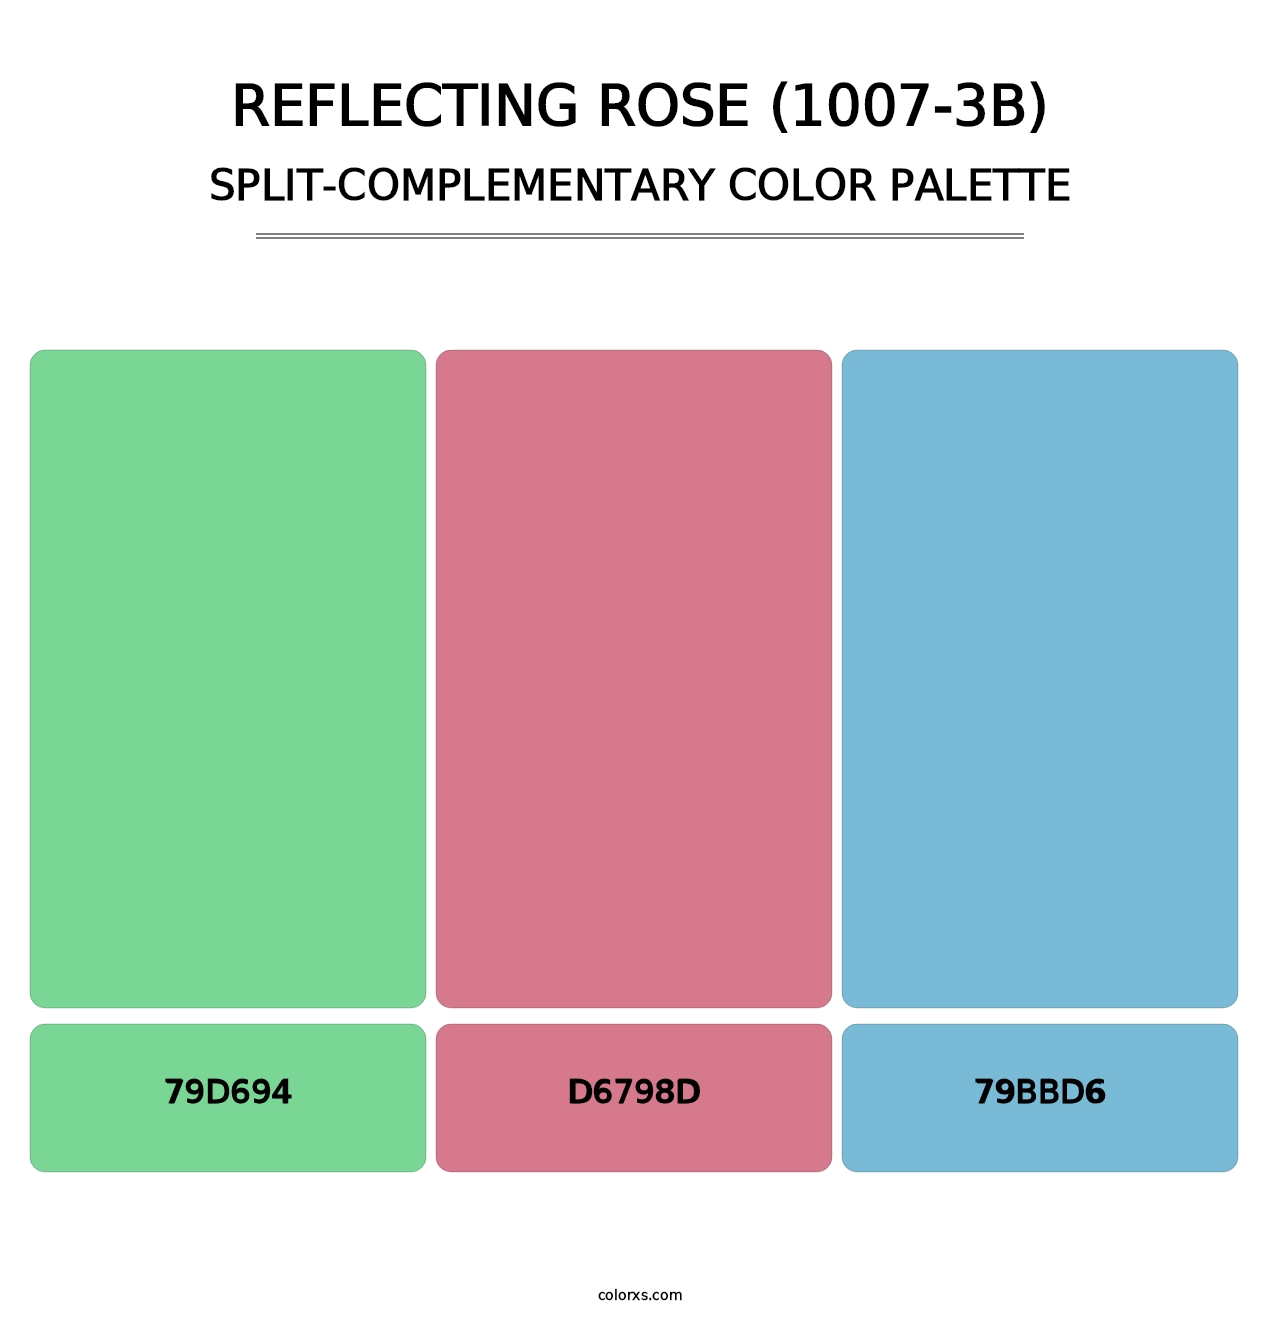 Reflecting Rose (1007-3B) - Split-Complementary Color Palette